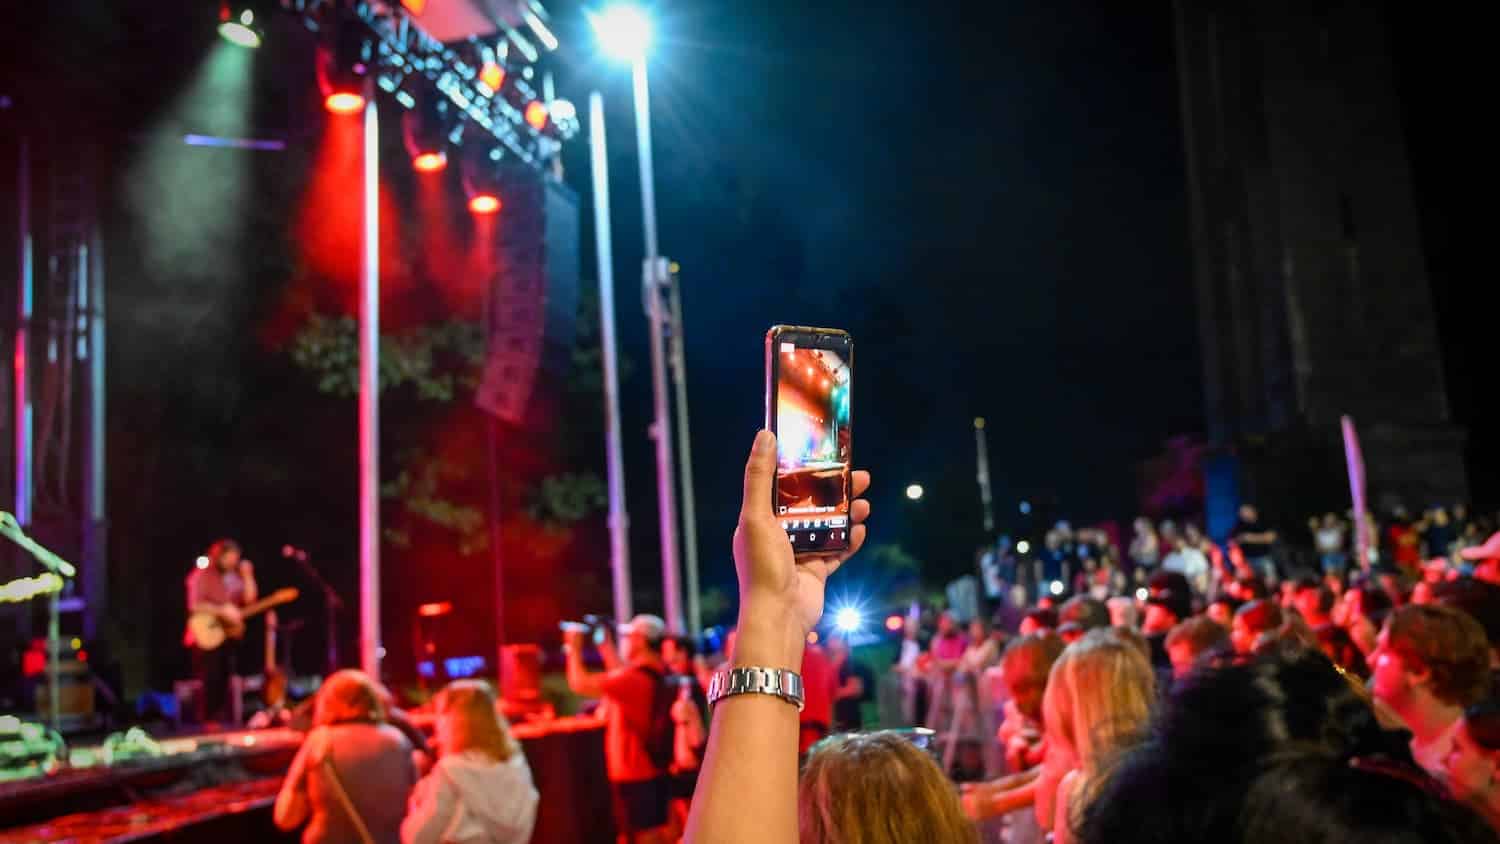 Festival-goers snapped pictures of Packapalooza's headlining performance.